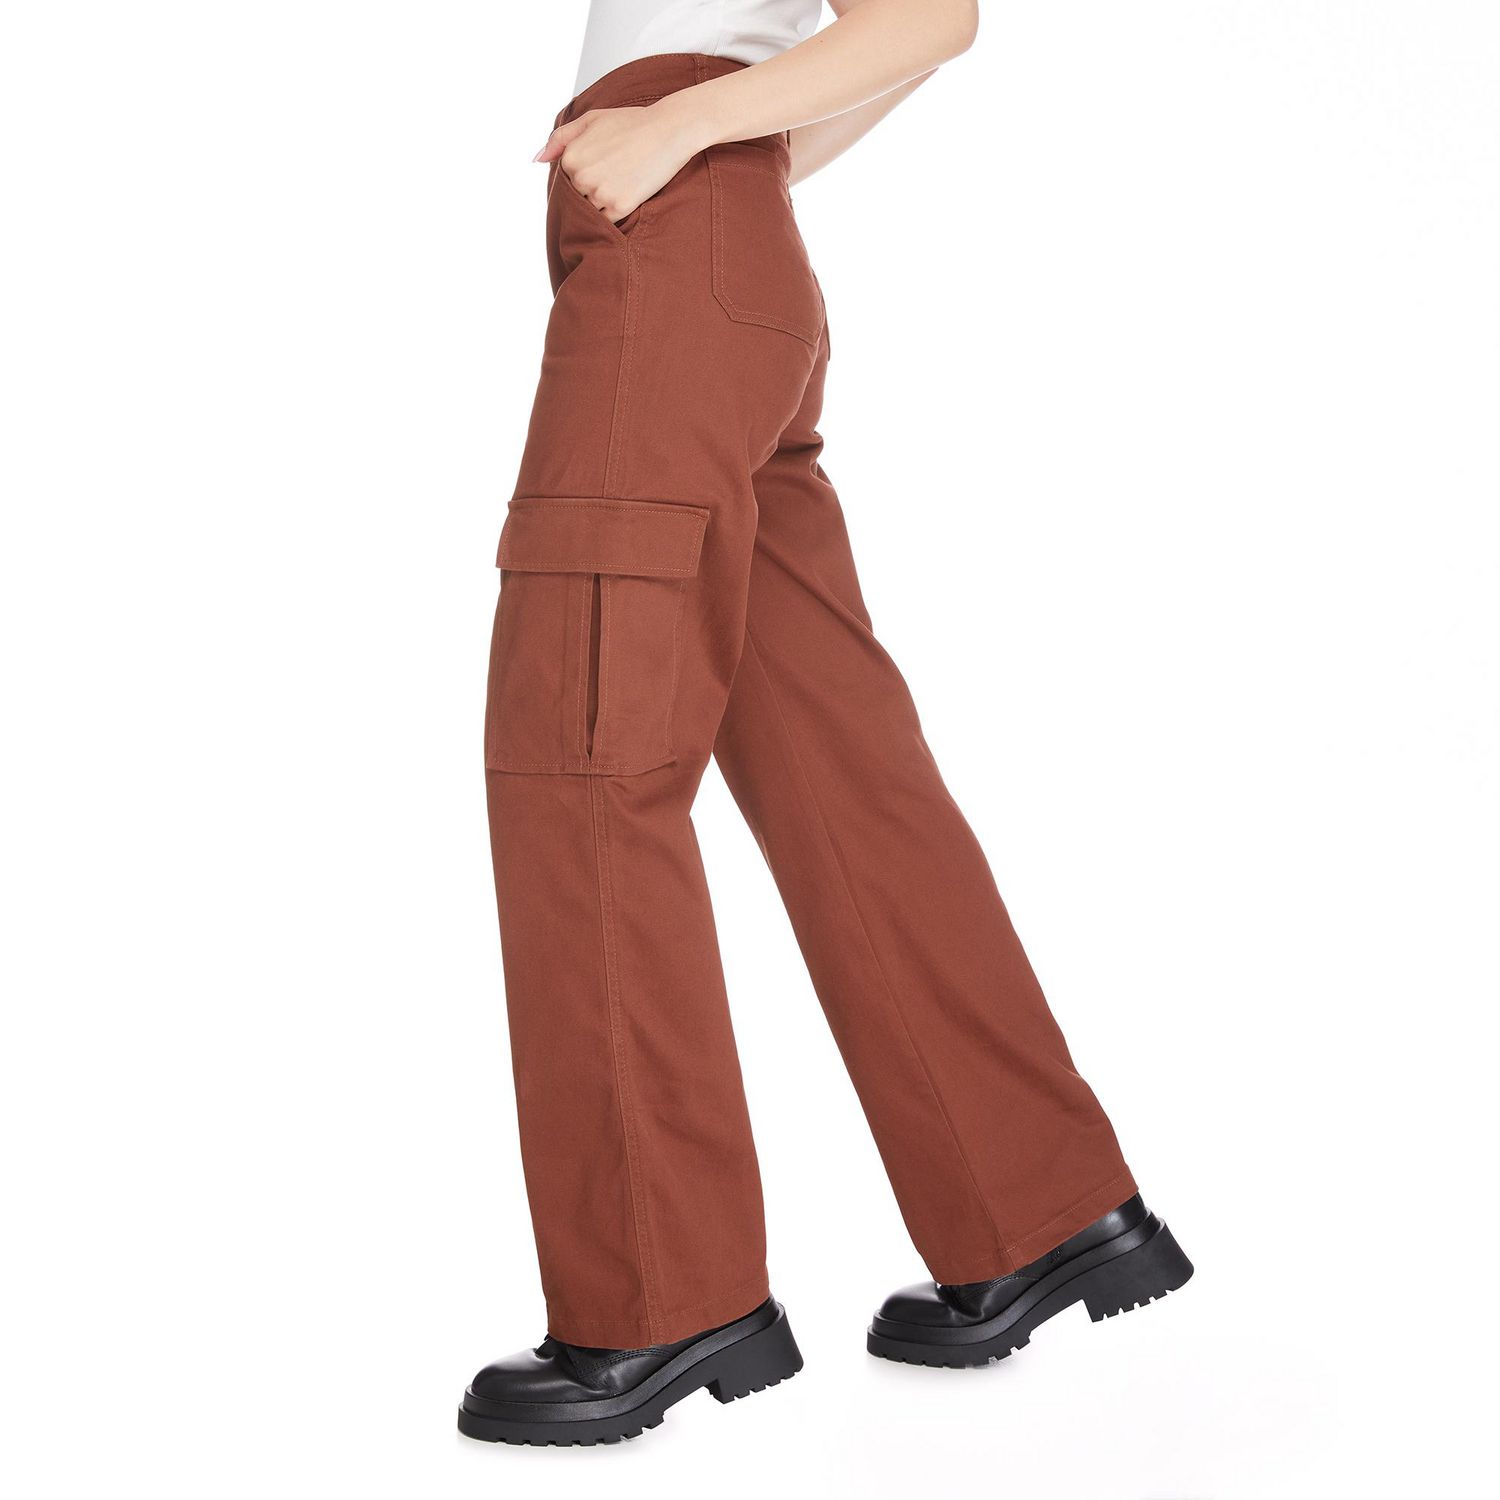 No Boundaries 100% Cotton Solid Brown Cargo Pants Size 7 - 87% off